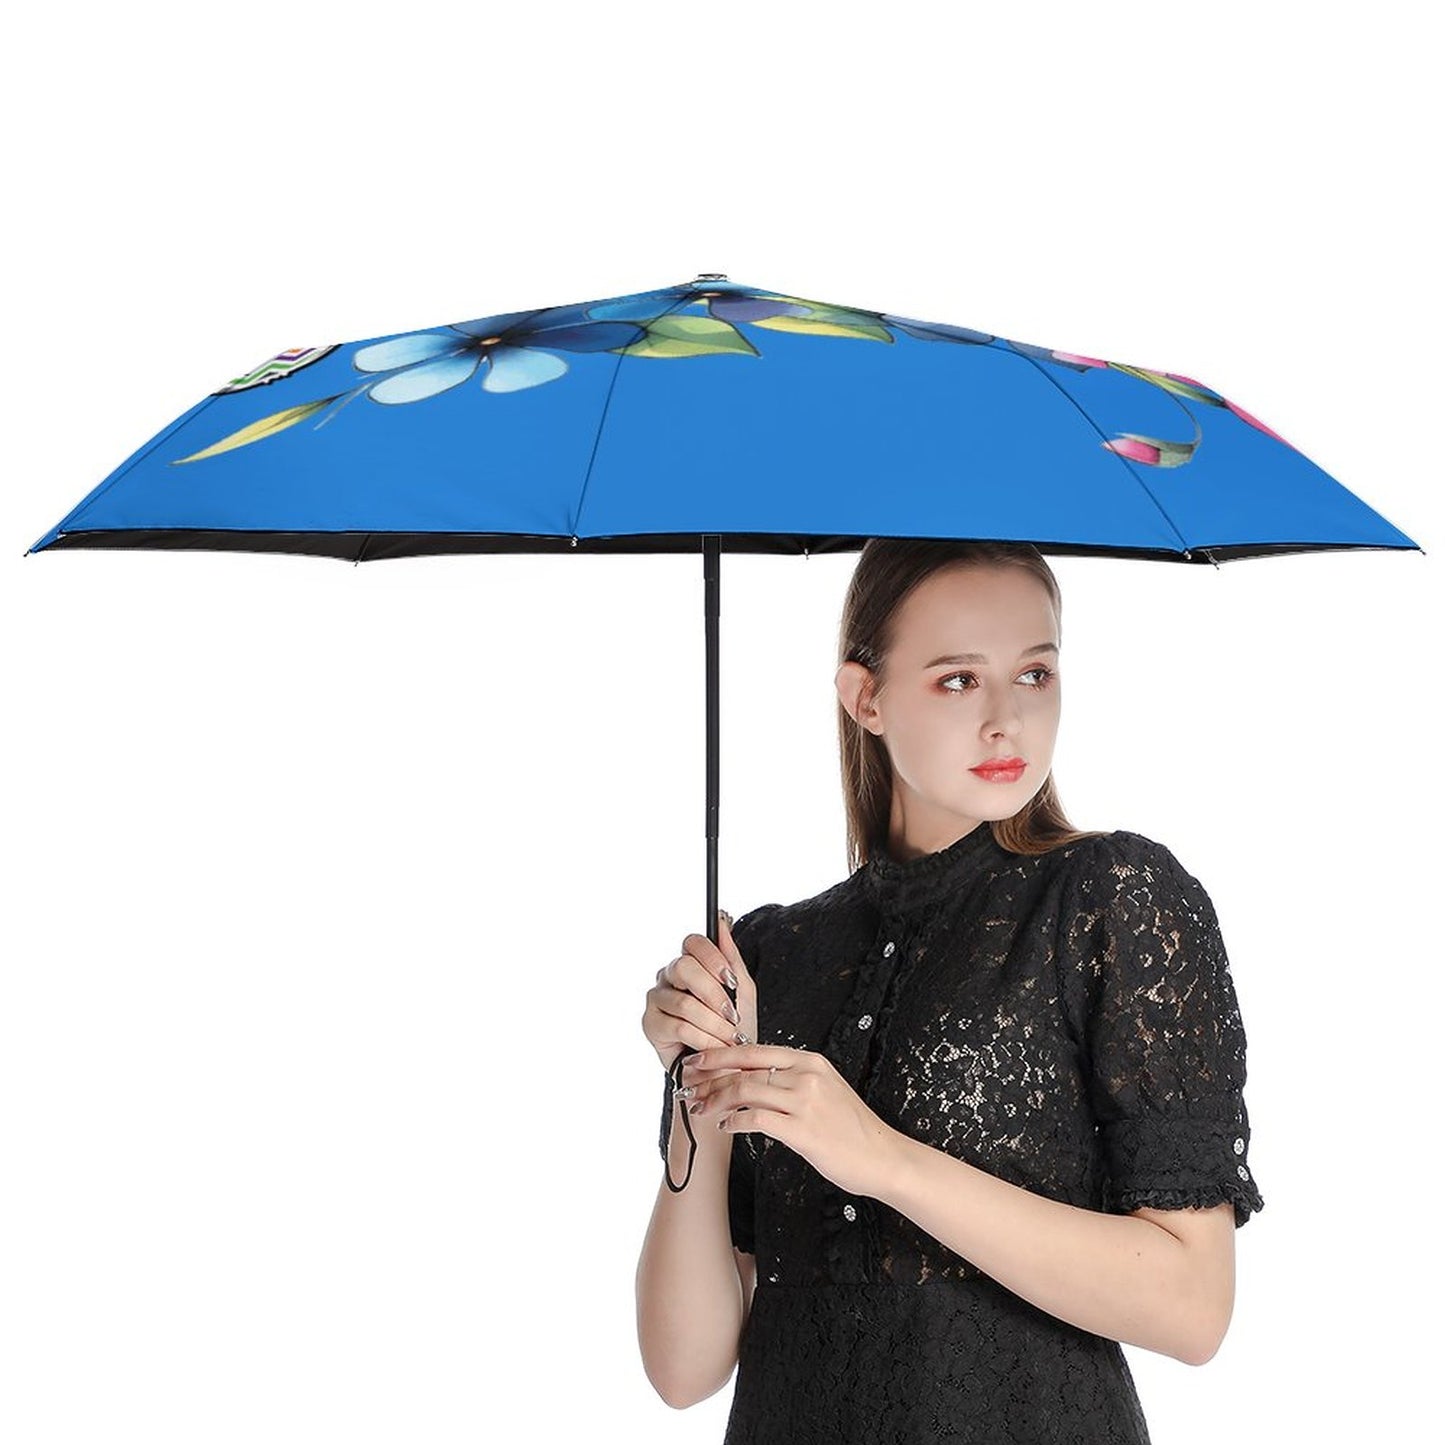 All My Hope Is In Jesus Christian Umbrella